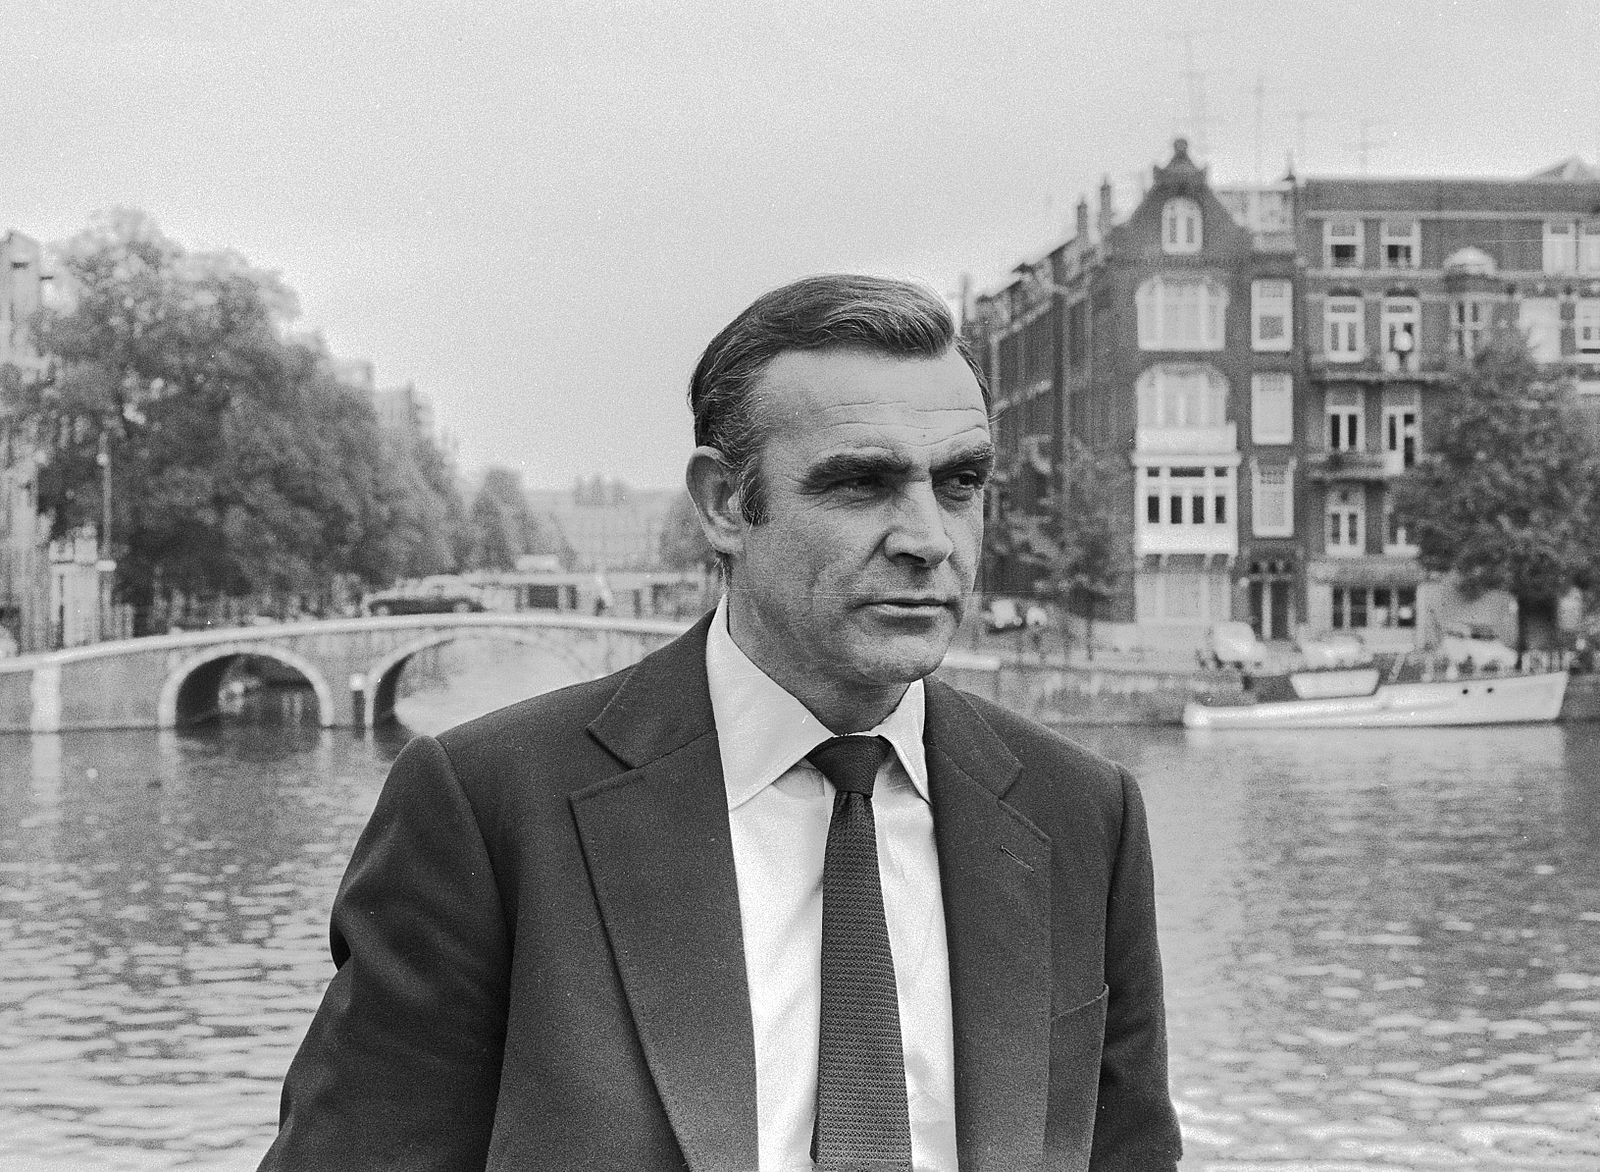 Sean Connery filming "Diamonds are Forever" 1971